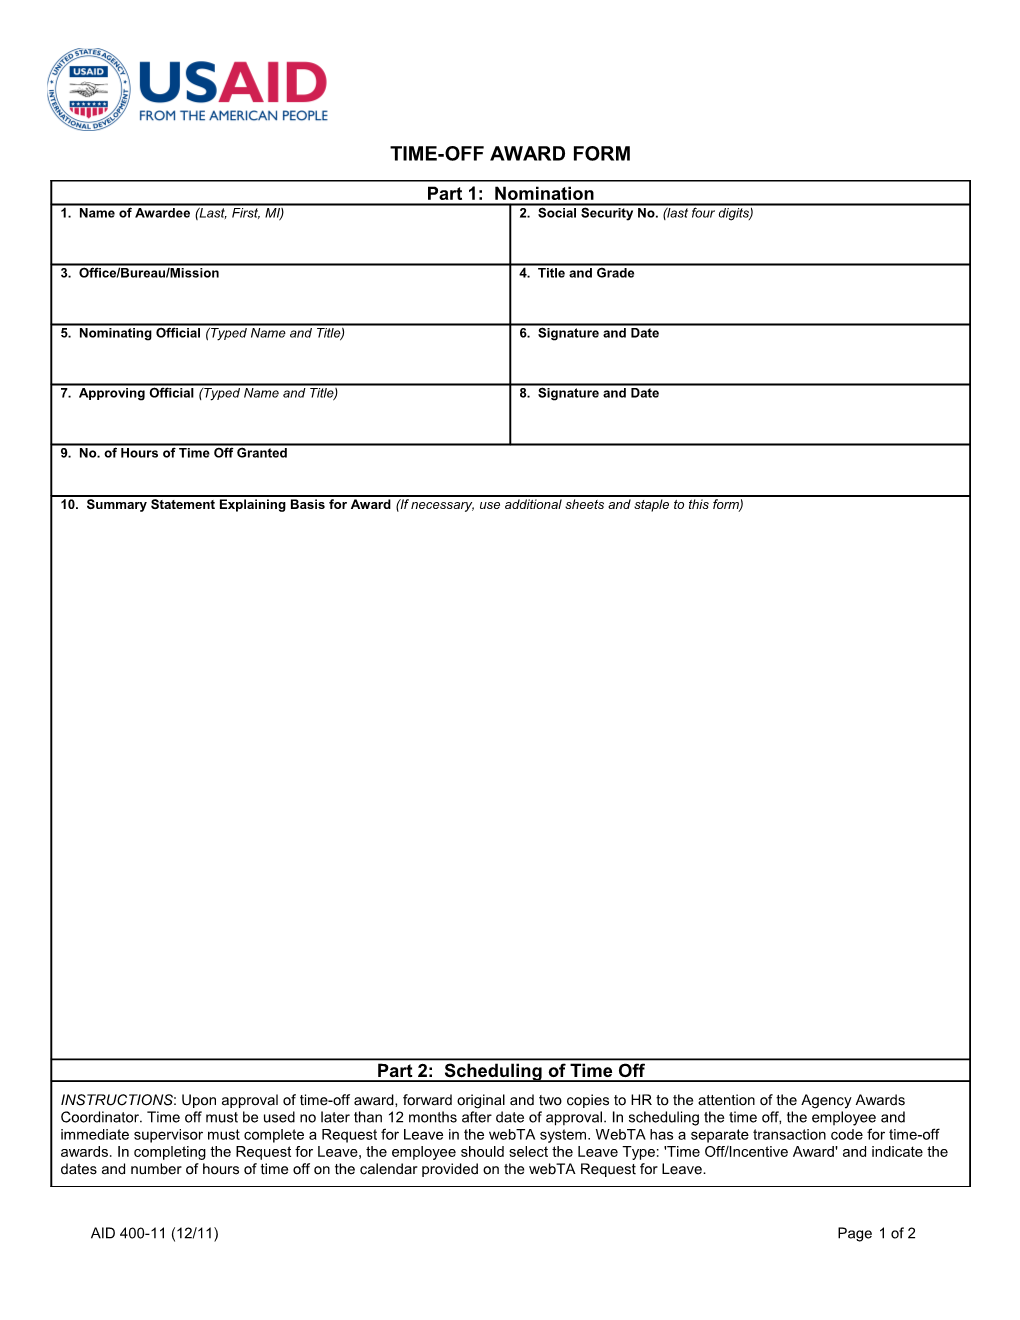 AID 400-11 - Time-Off Award Form